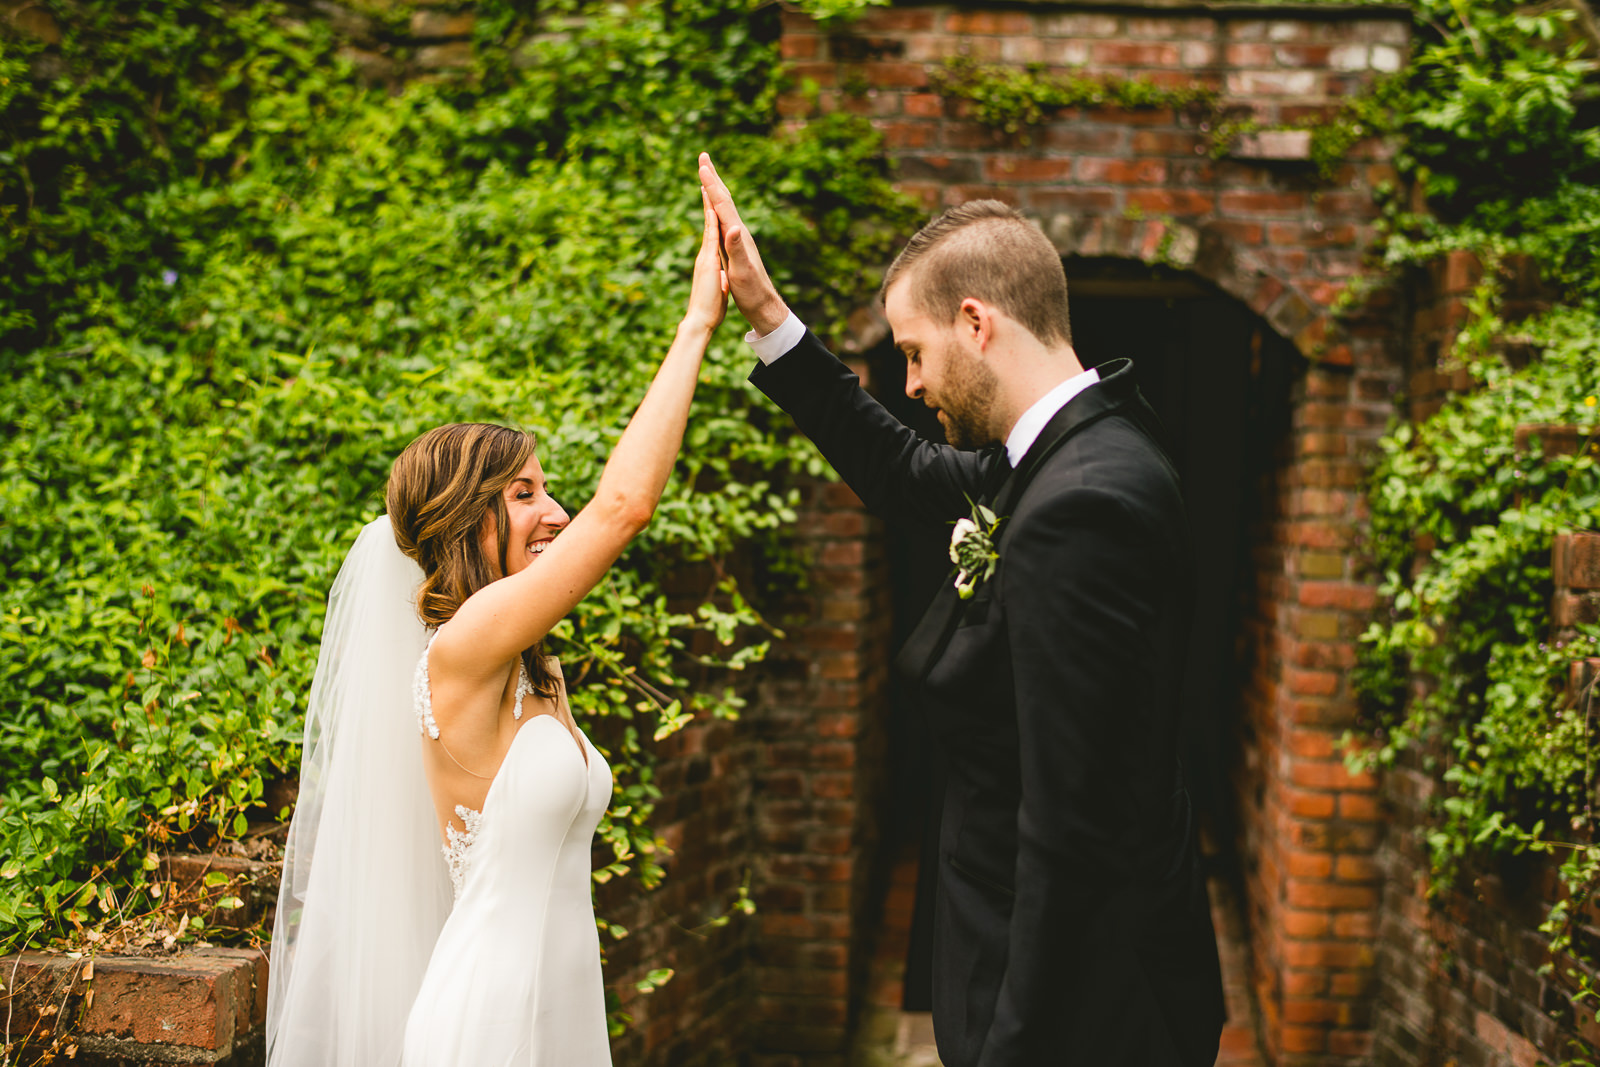 42 real moments with bride and groom - Club of Hillbrook Wedding // Jenna + Ben